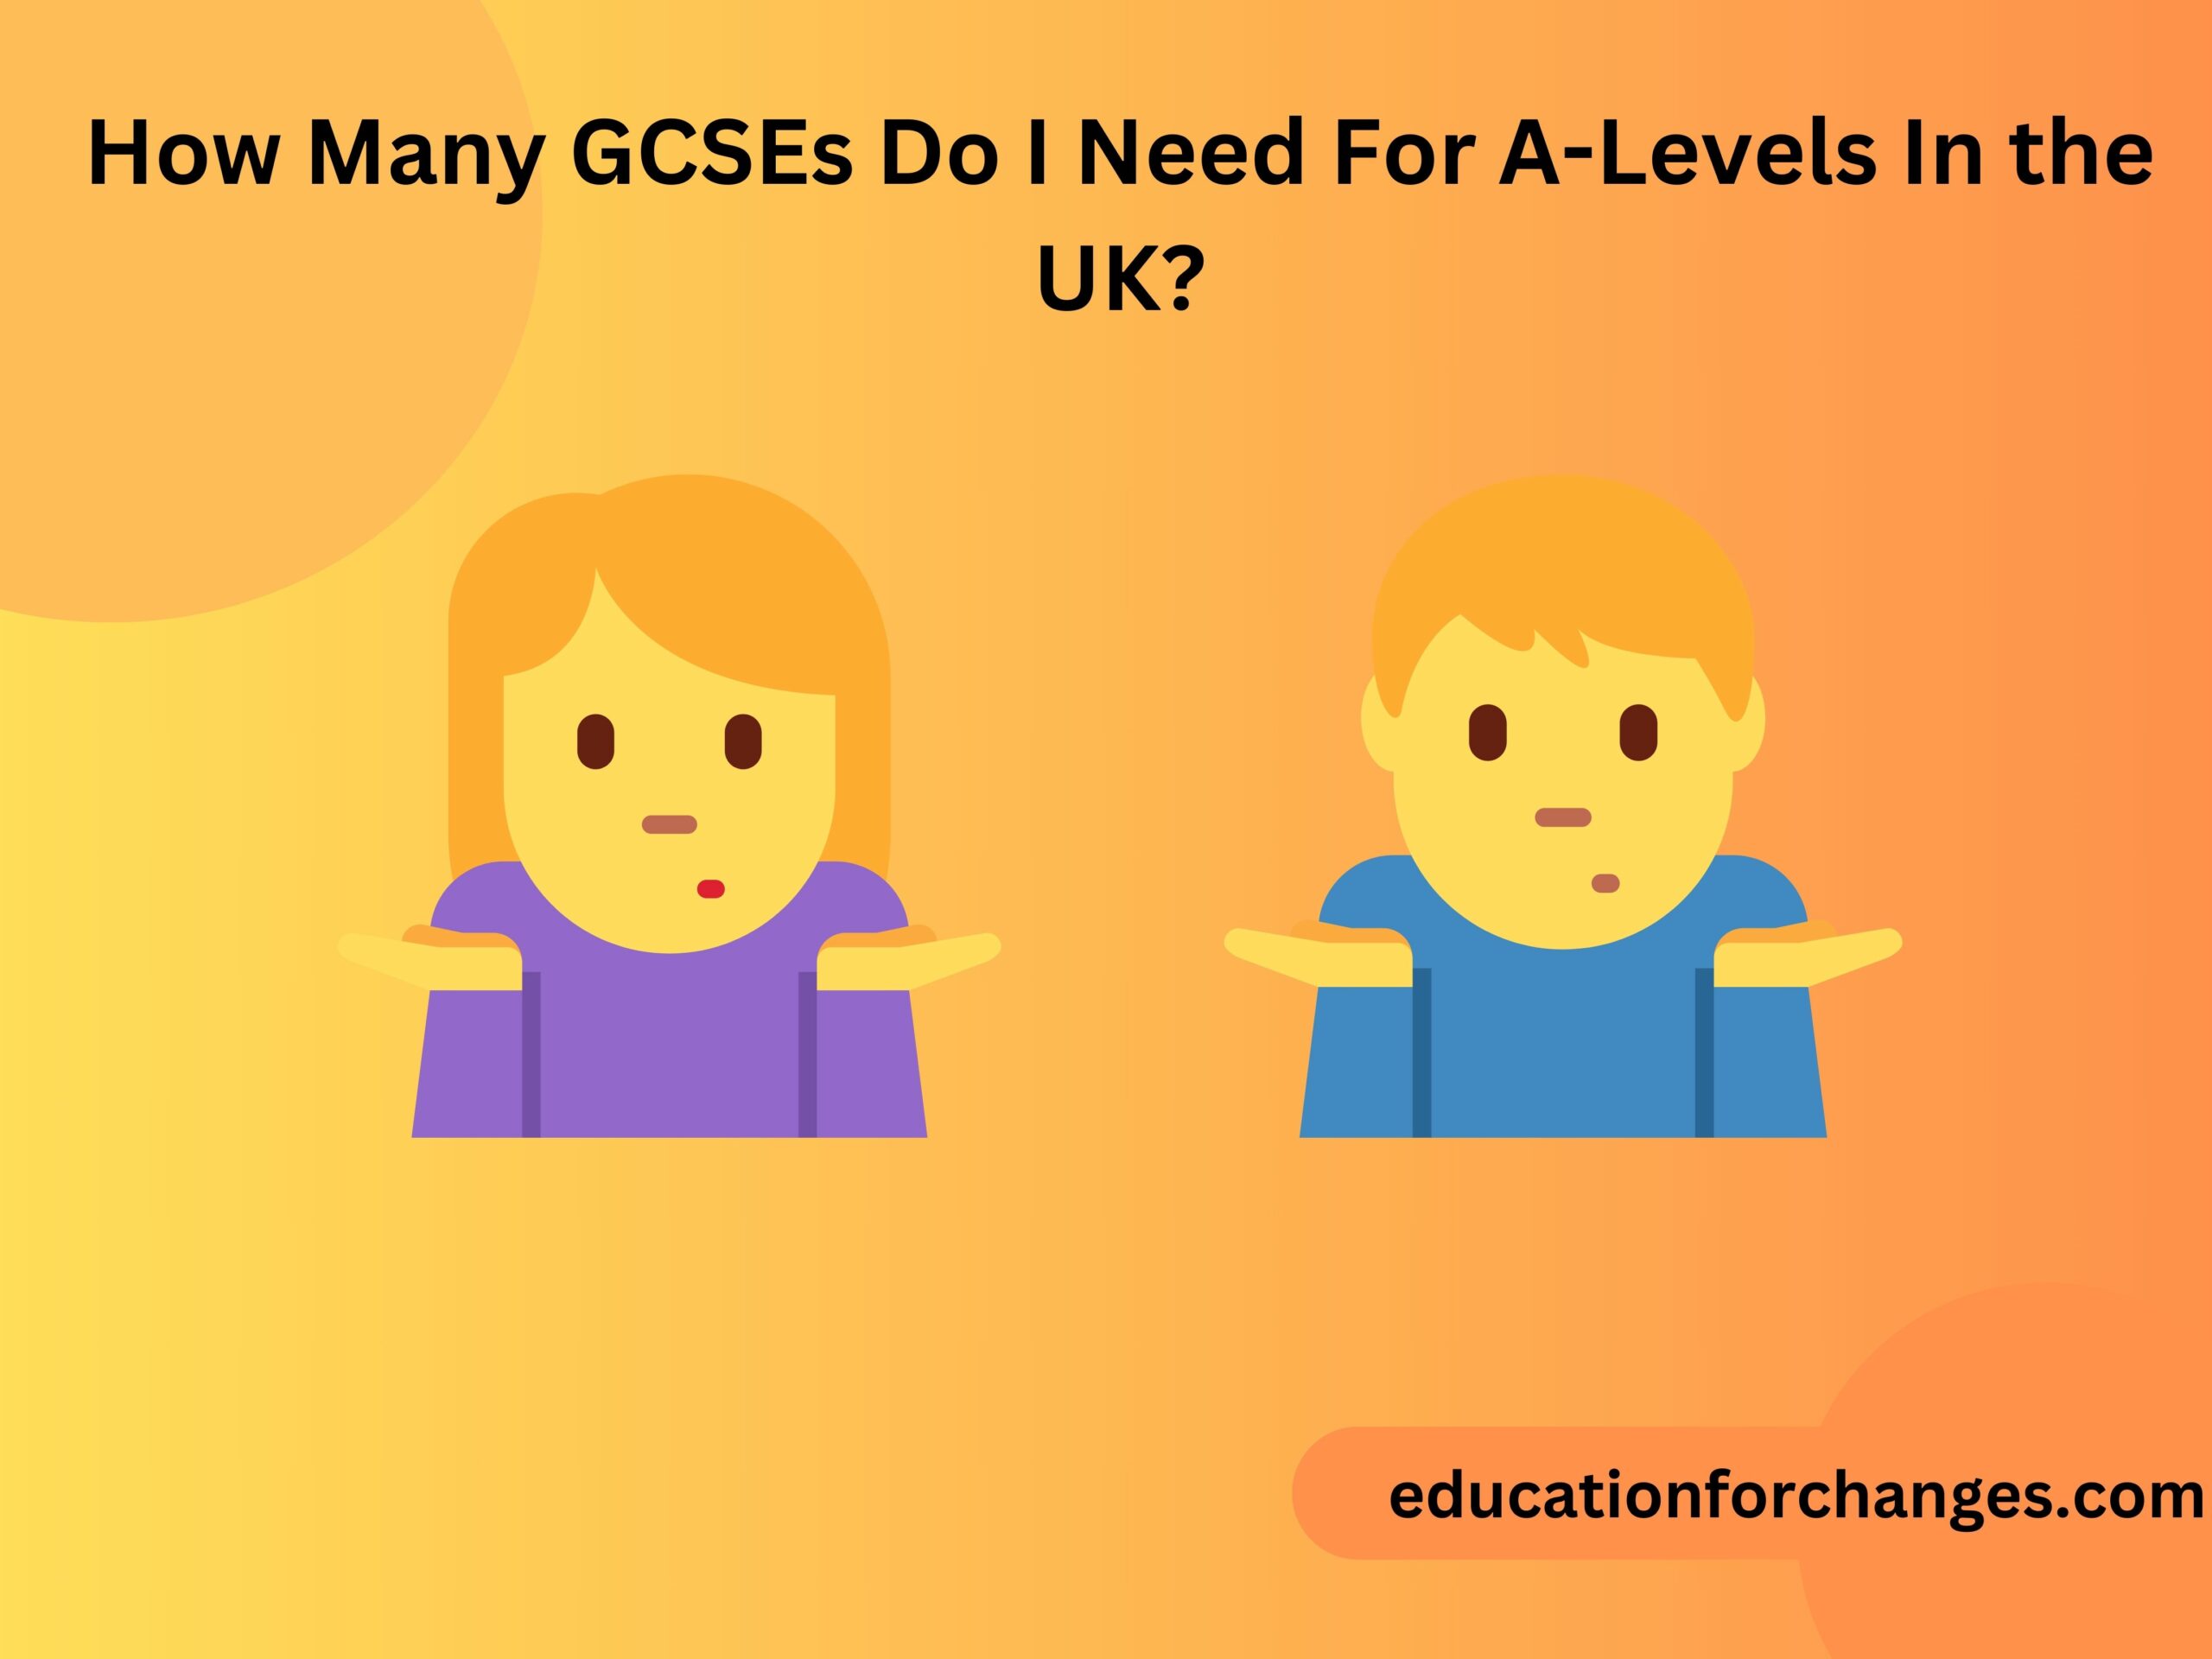 How Many GCSEs Do I Need For A-Levels In the UK